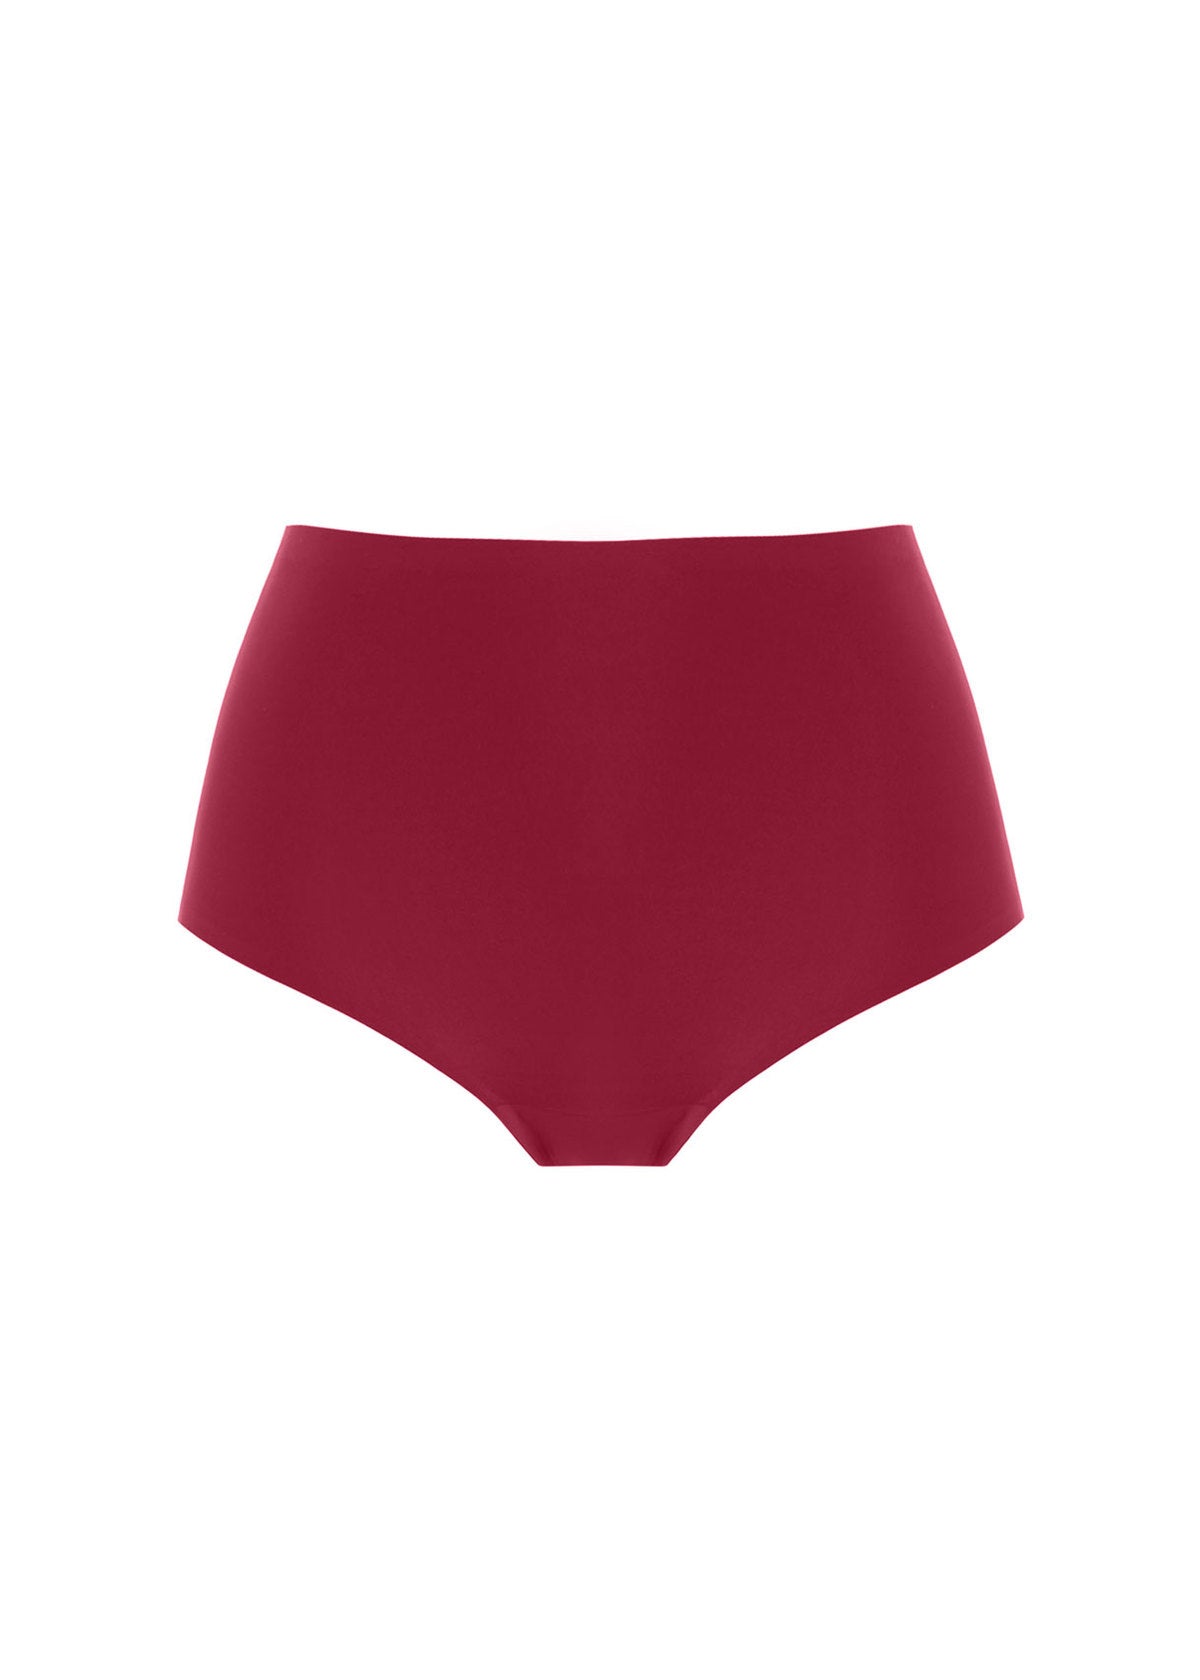 Fantasie Smoothease Invisible Stretch Briefs - Red